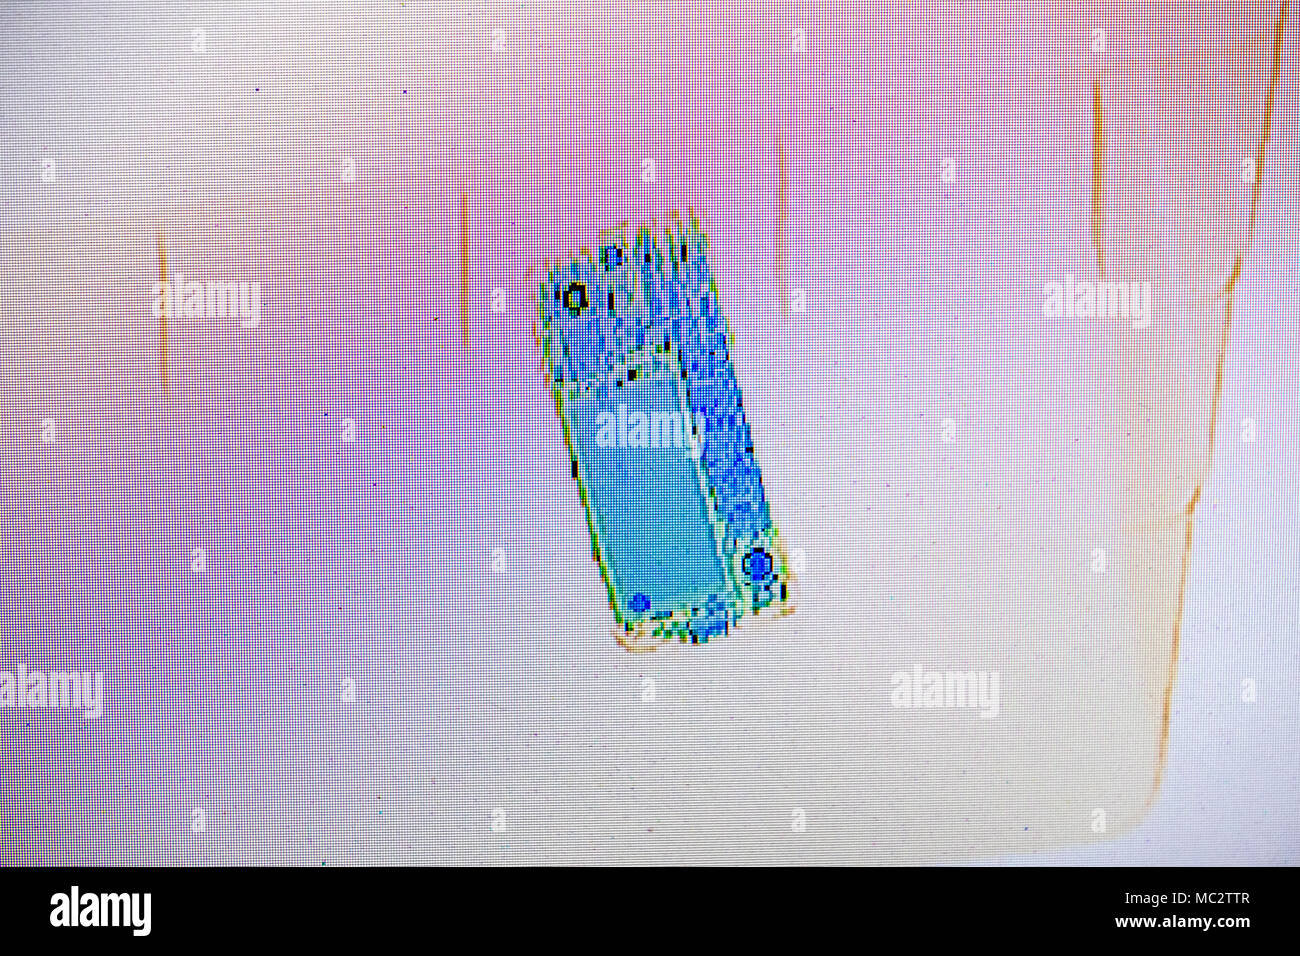 X-ray screenshot of a bag with a smartphone. Stock Photo